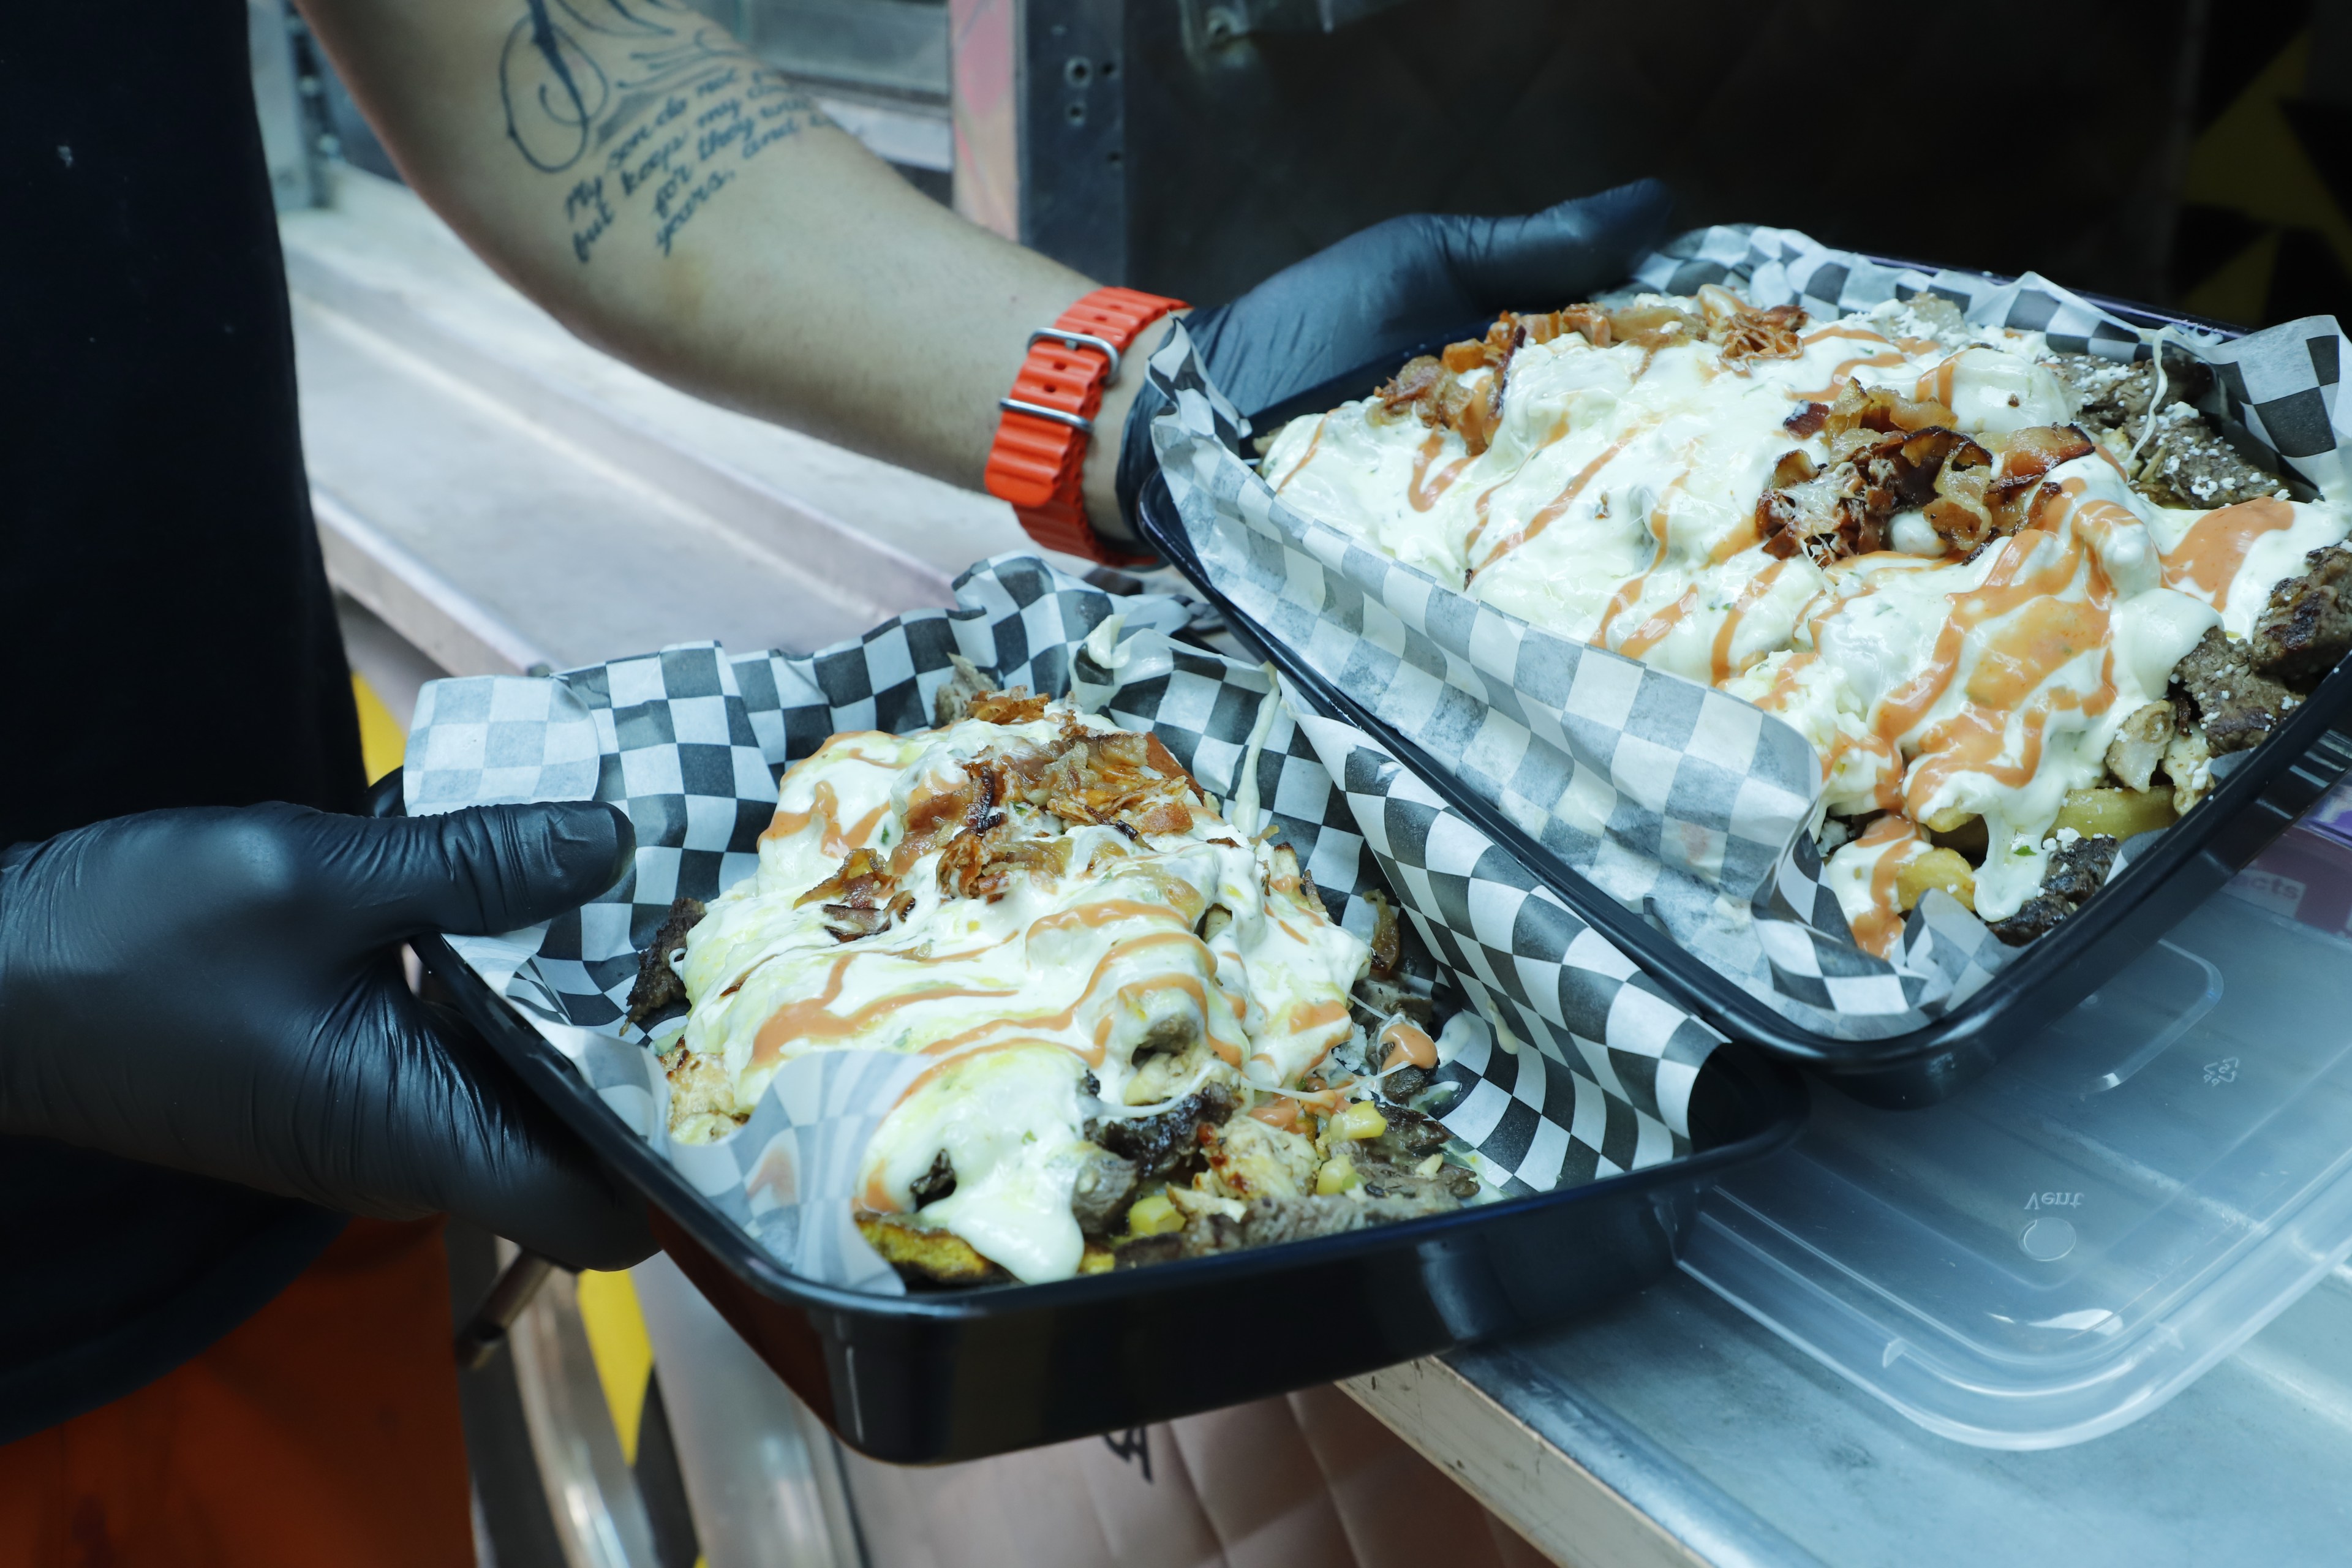 A person in gloves holds a tray of loaded fries with various toppings and sauces.